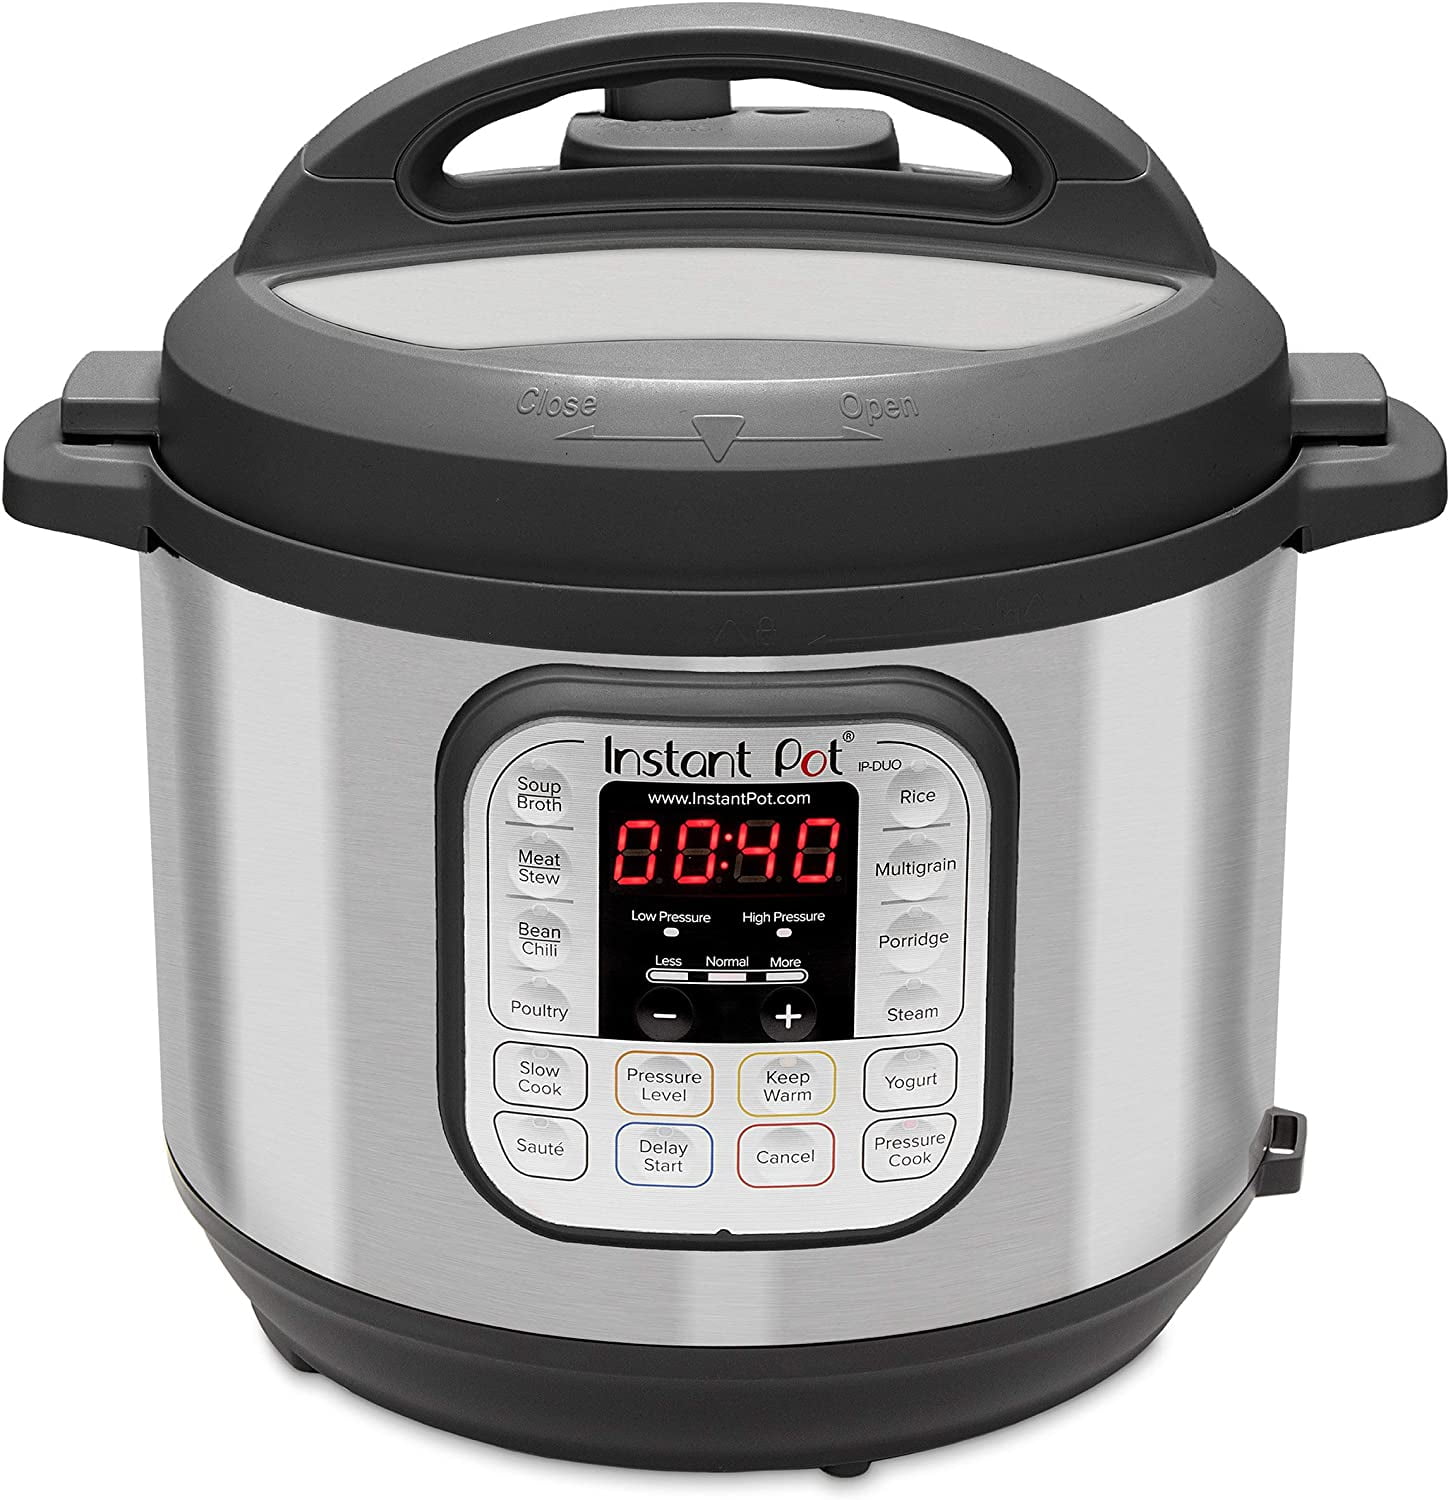 and Warmer Steamer Yogurt Maker Rice Cooker 6 Quart Slow Cooker Saute Instant Pot Duo 7-in-1 Electric Pressure Cooker 14 One-Touch Programs